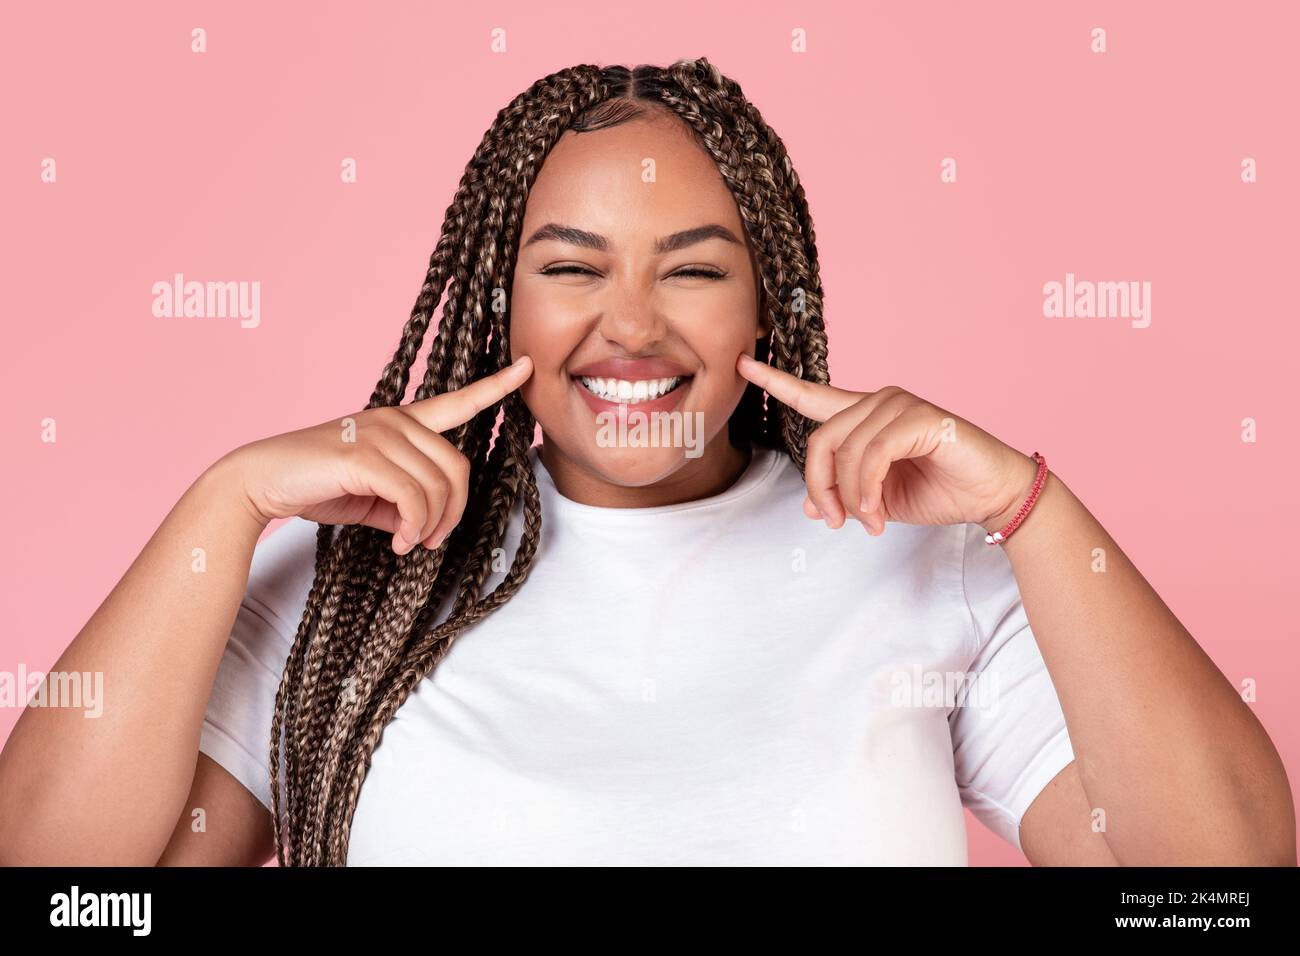 Happy African American Obese Lady Touching Cheeks Posing In Studio Stock Photo